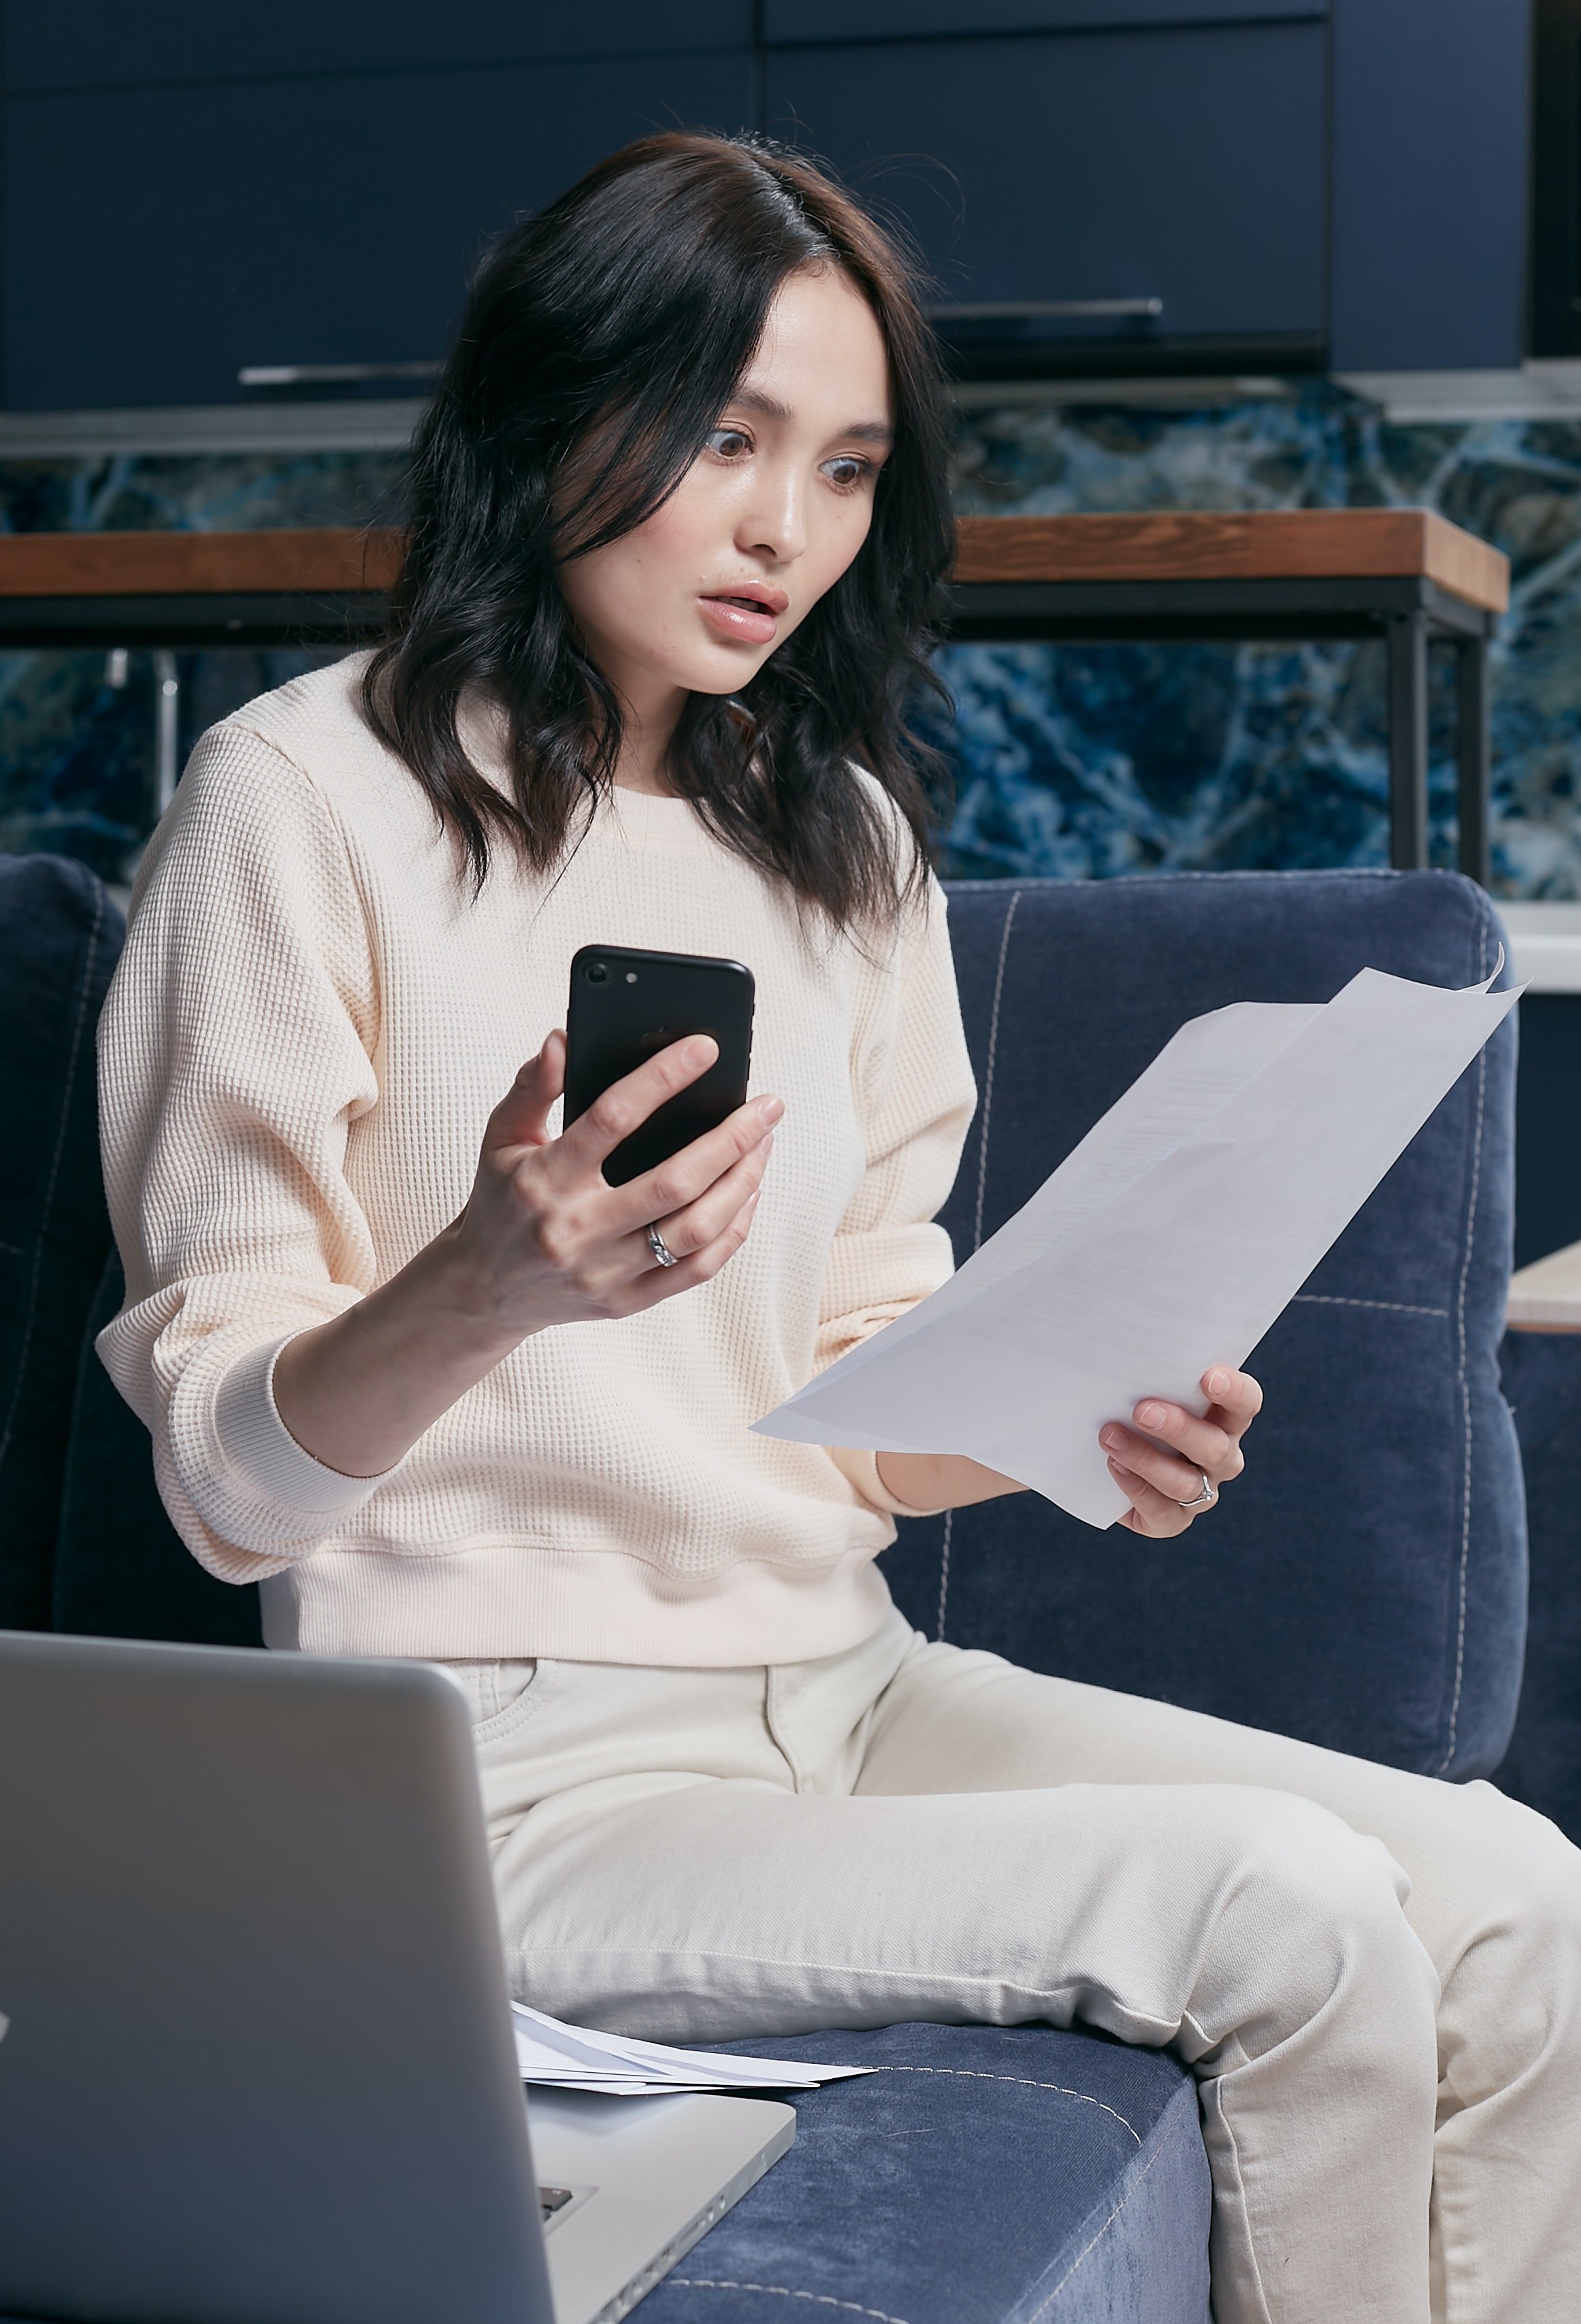 A woman looking stunned from starring at a document while holding a phone | Source: Pexels